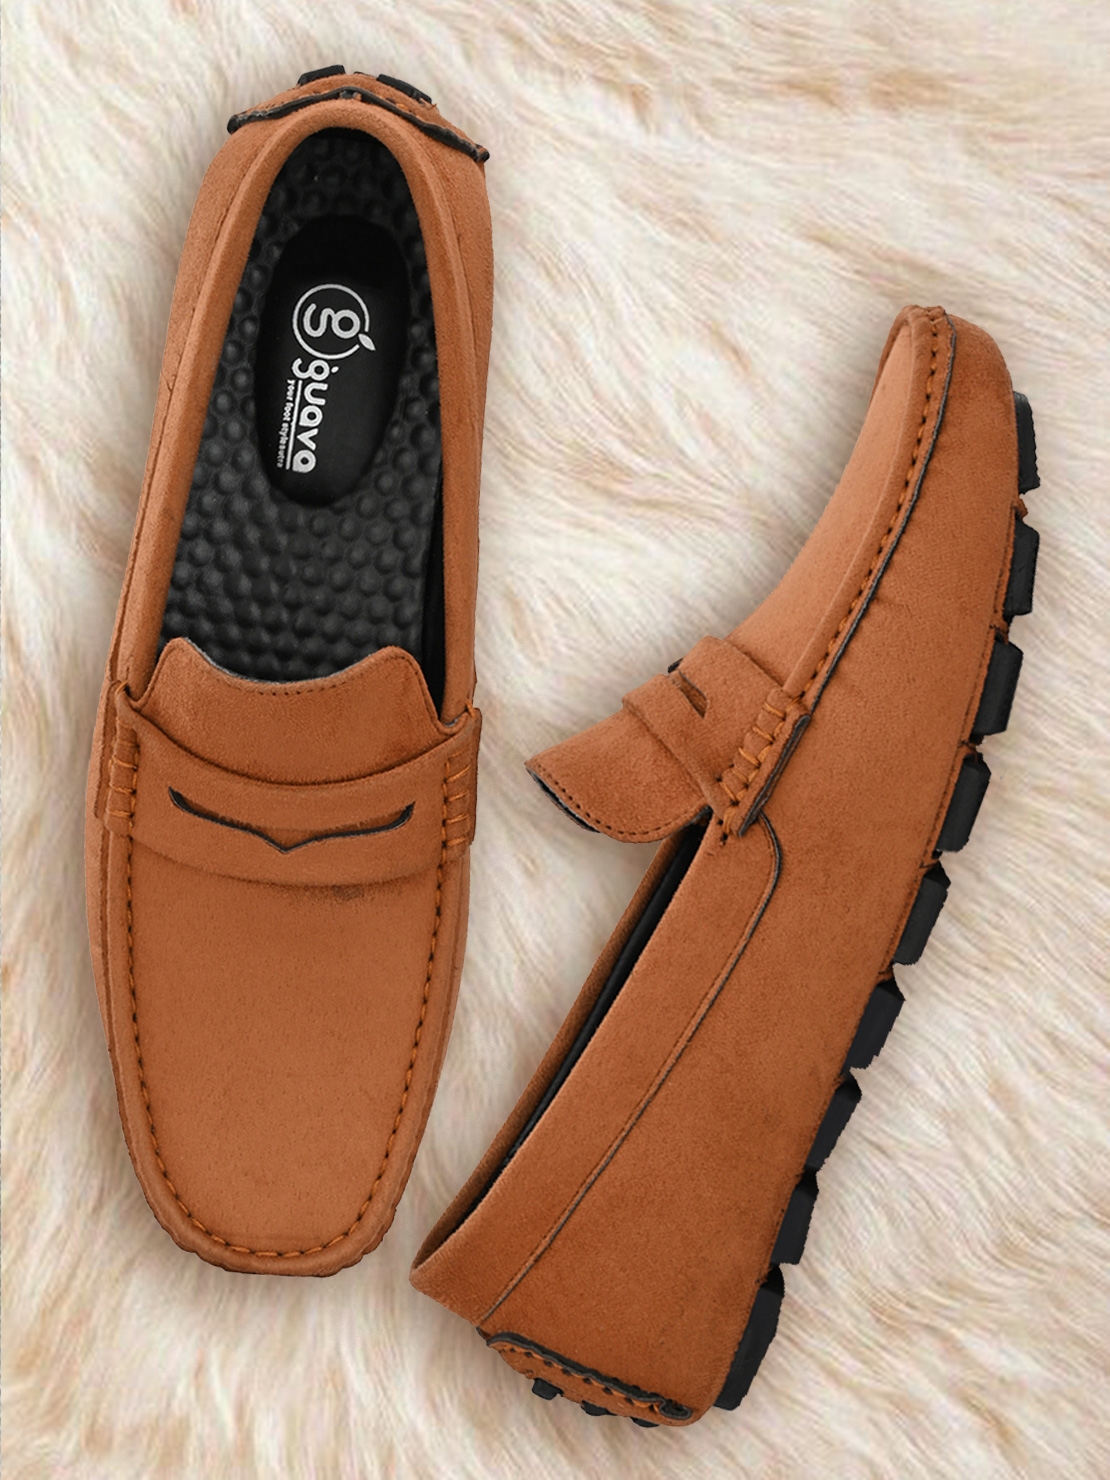 Guava | Guava men's Driving Loafers Shoes - Tan